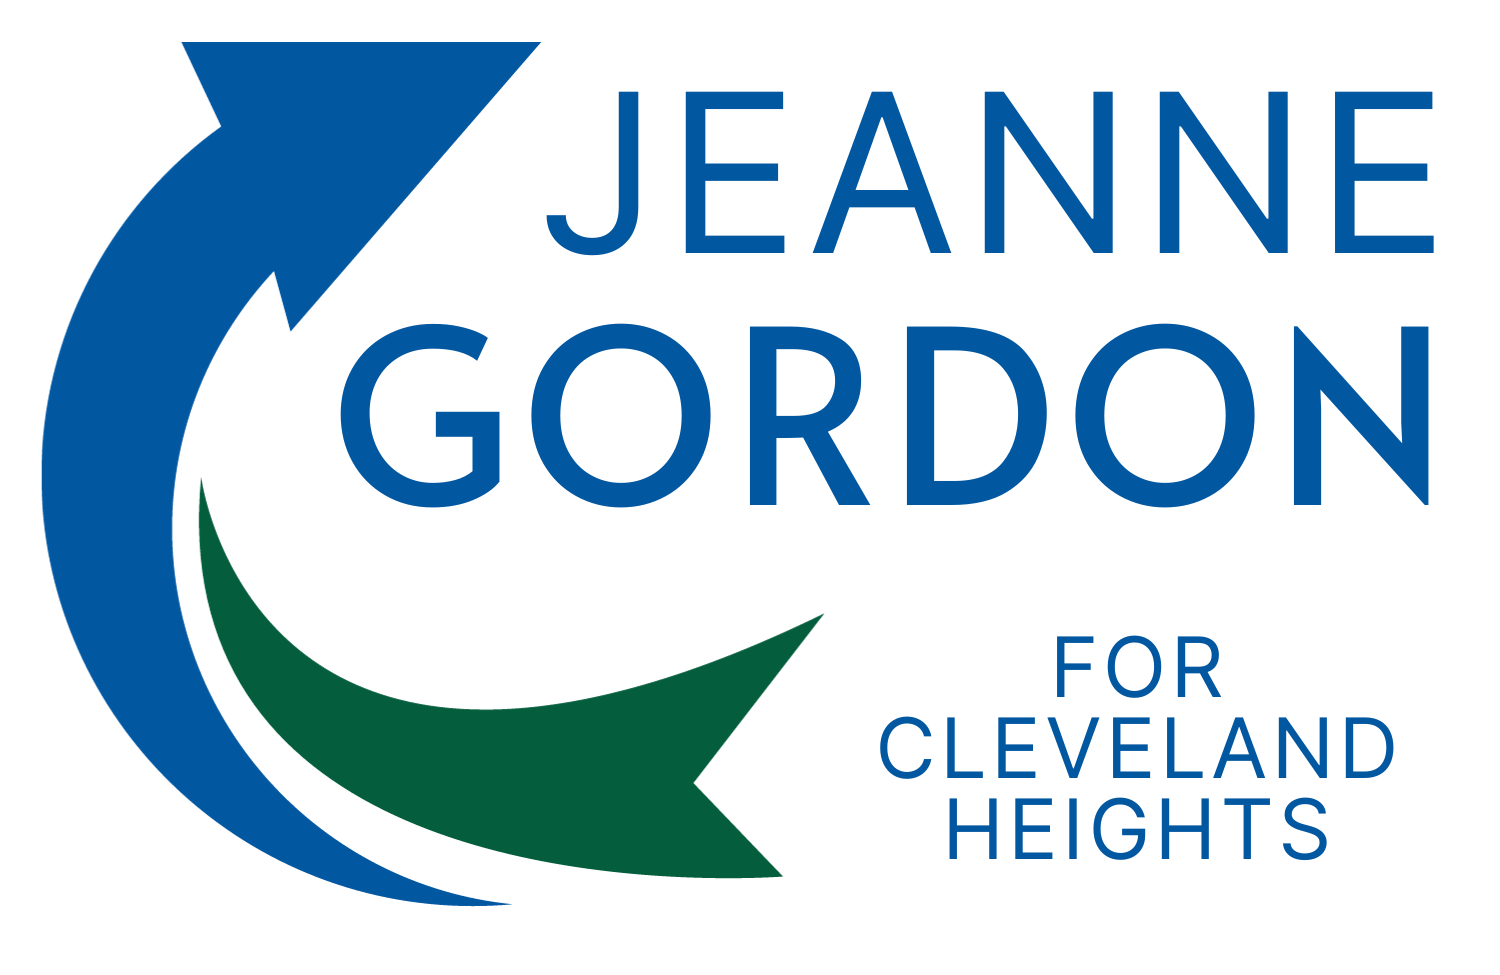 Jeanne Gordon for Cleveland Heights